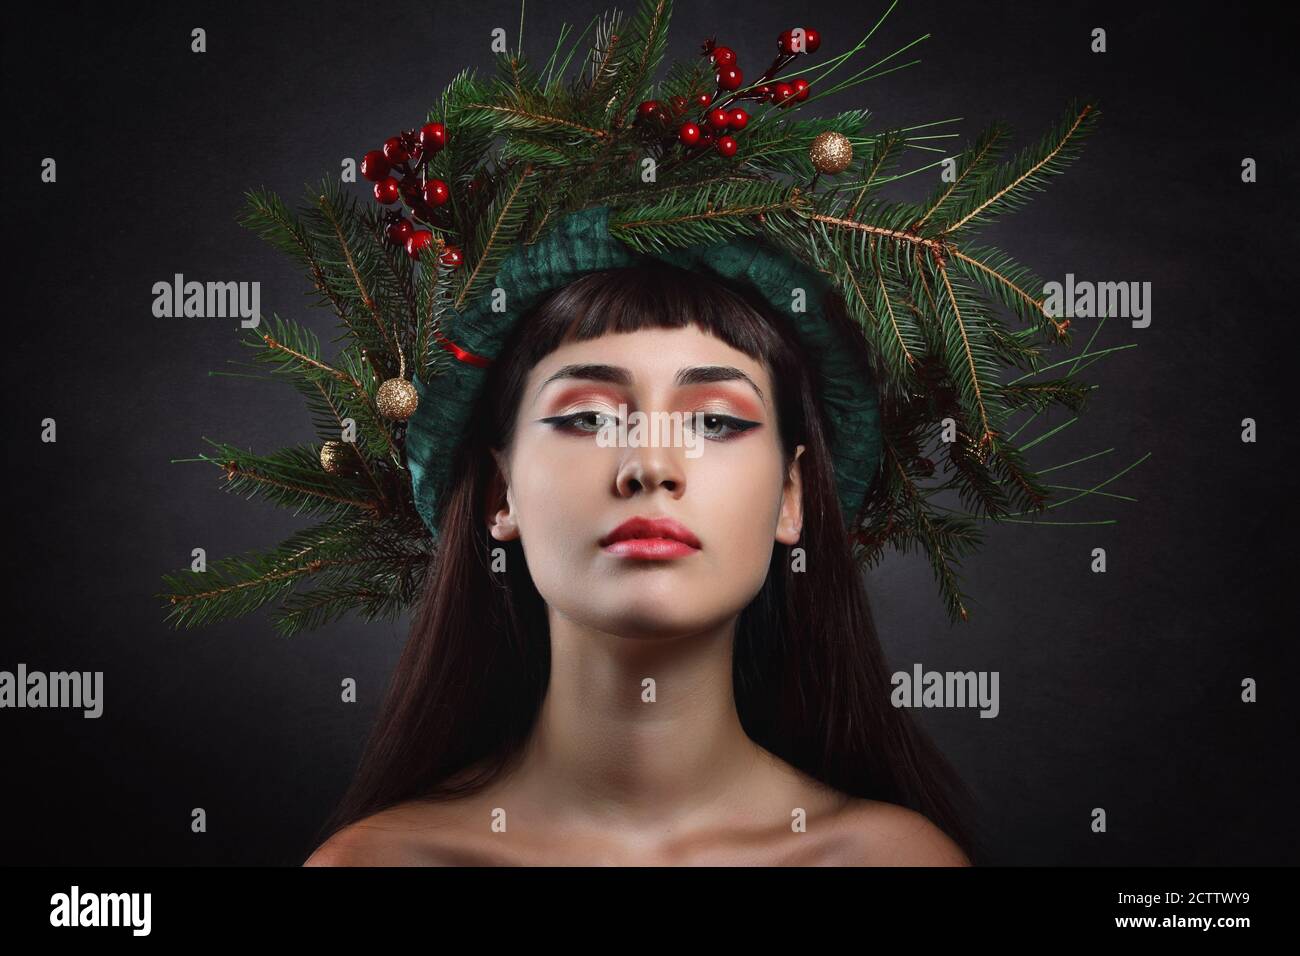 Winter portrait of a young woman with crown of pine branches and red berries Stock Photo